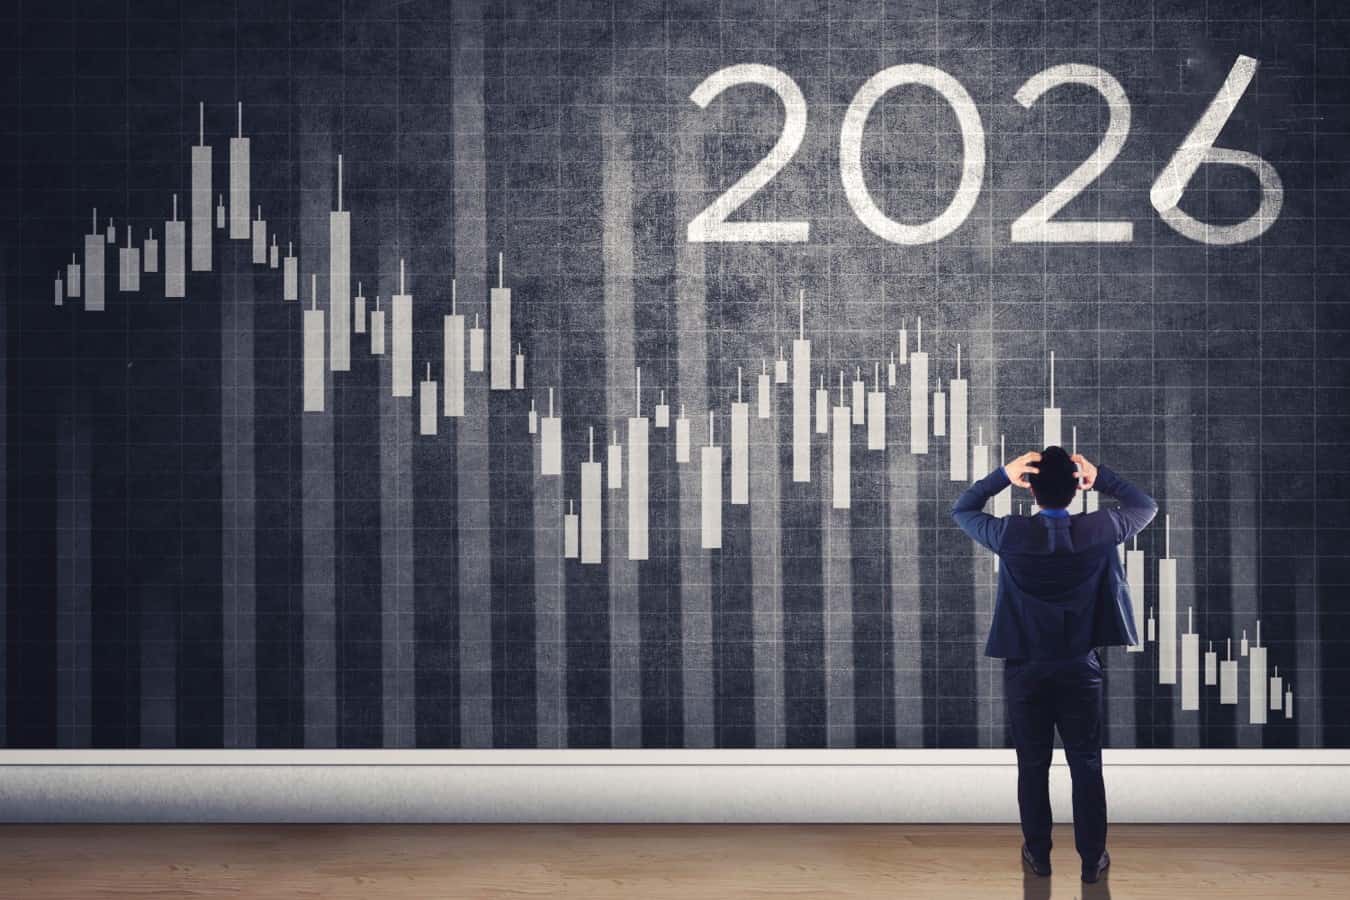 Is Forex Going to End in 2026?